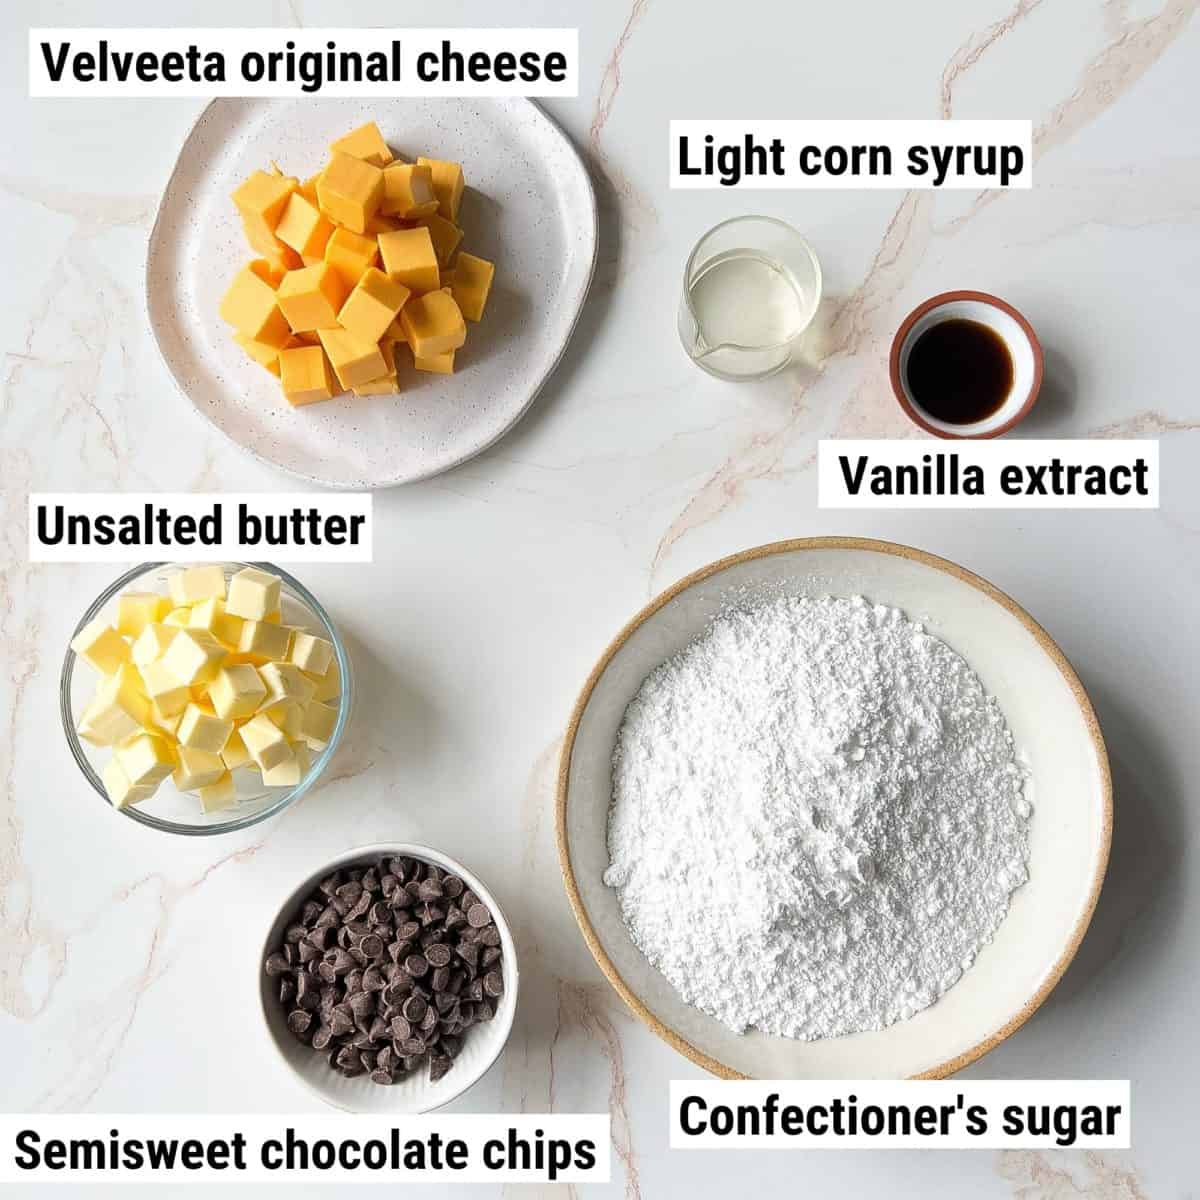 The ingredients used to make Velveeta fudge spread out on a table.